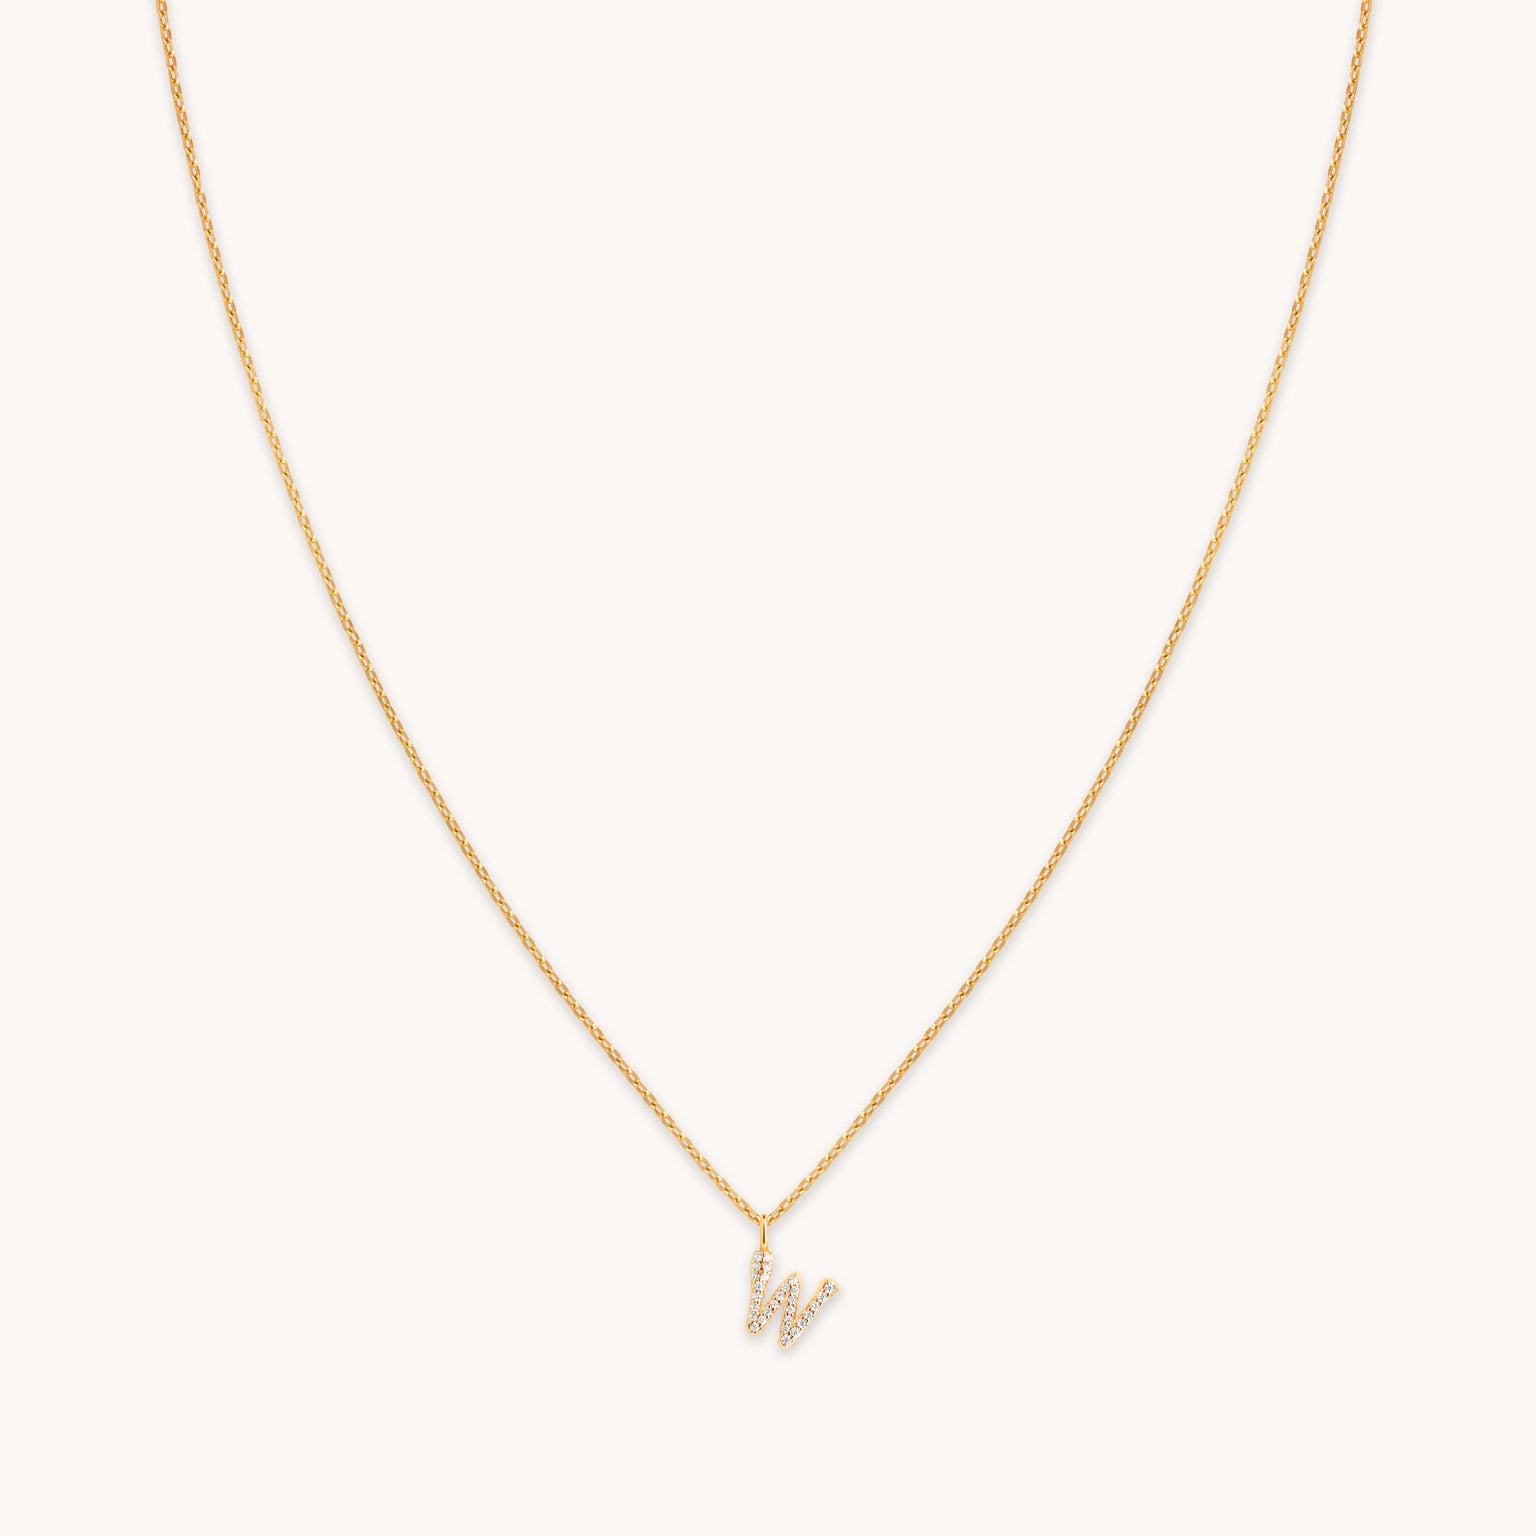 W Initial Pavé Pendant Necklace in Gold